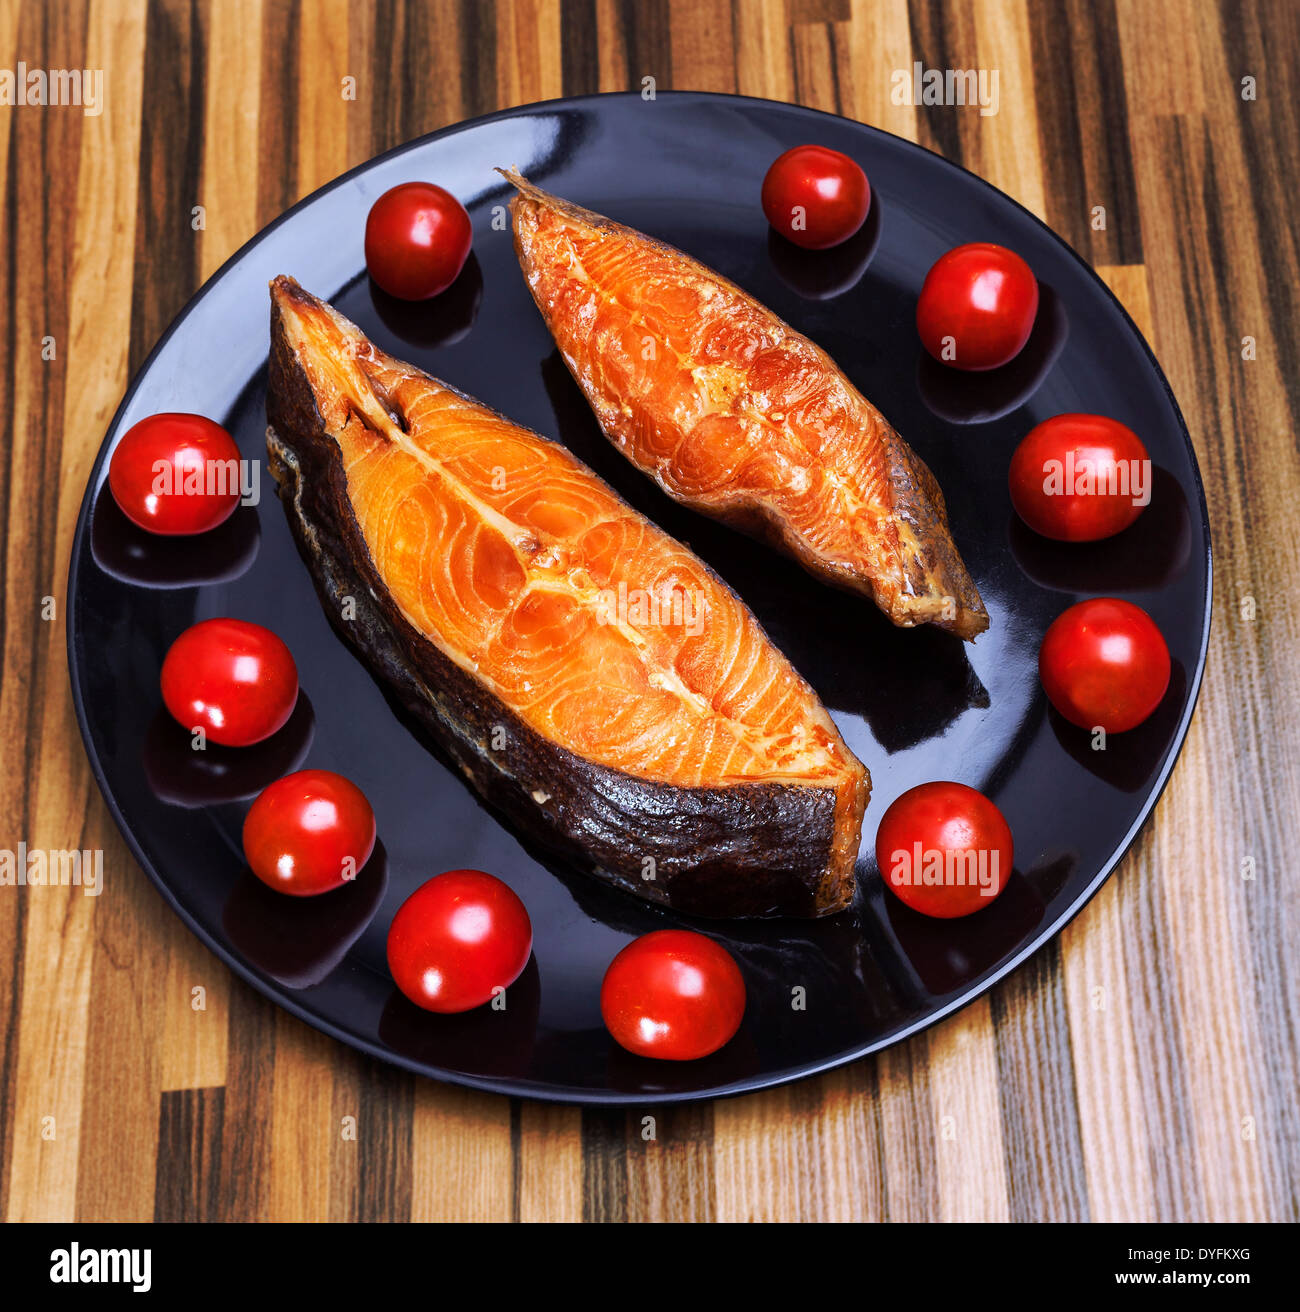 Smoked fish on plate with fresh tomatoes Stock Photo